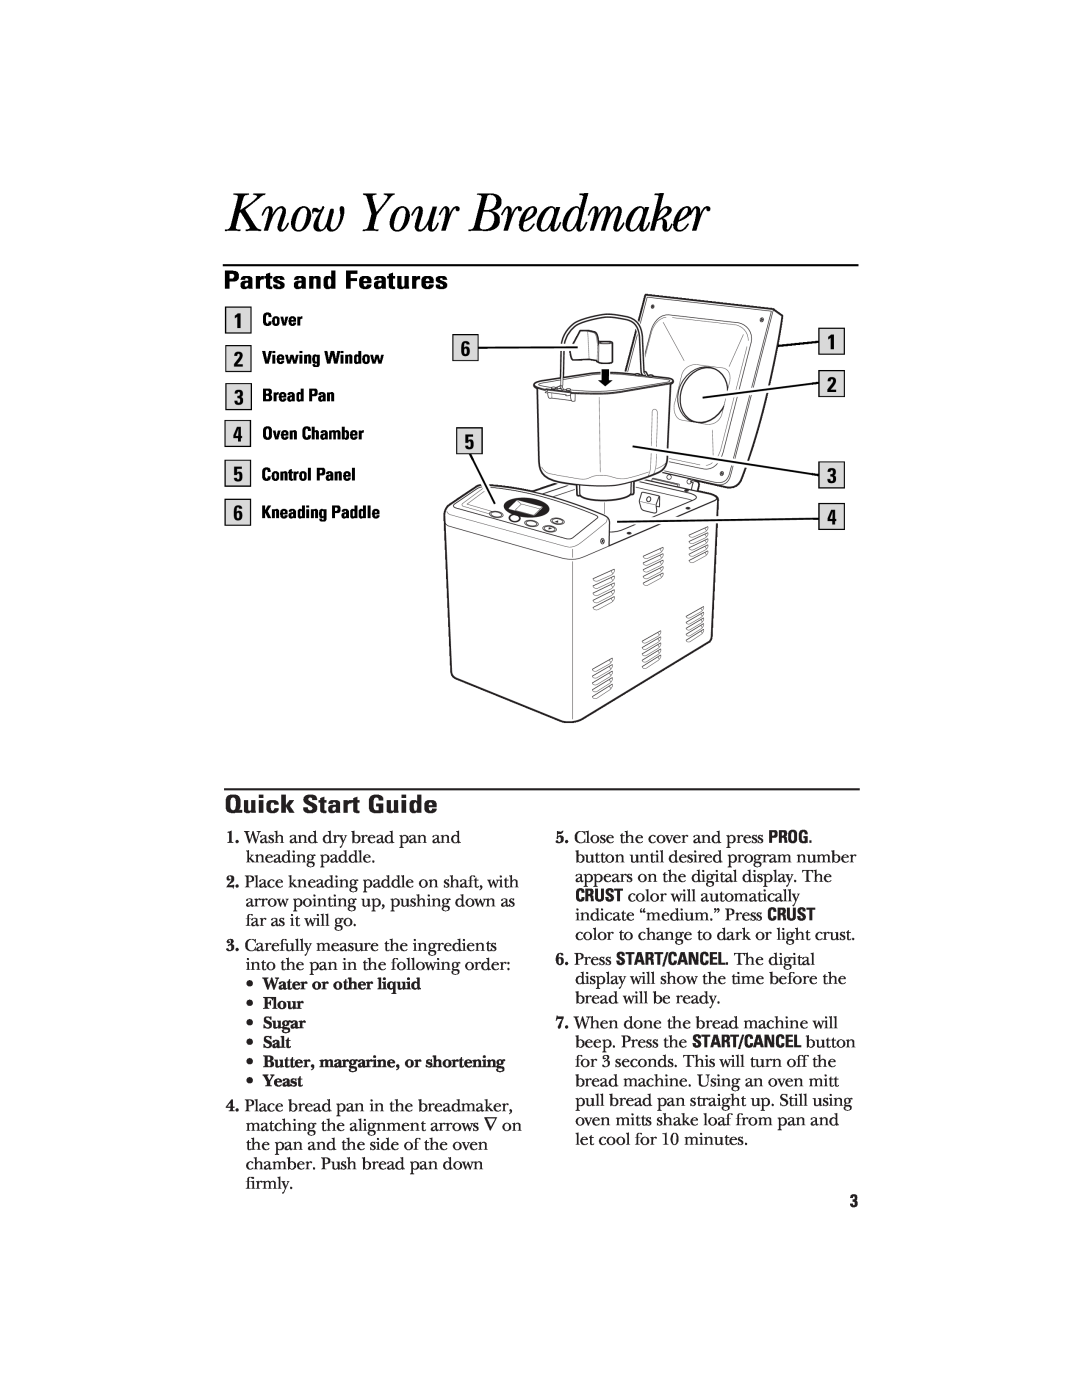 GE 840081600, 106732 quick start Know Your Breadmaker, Parts and Features, Quick Start Guide, Kneading Paddle 